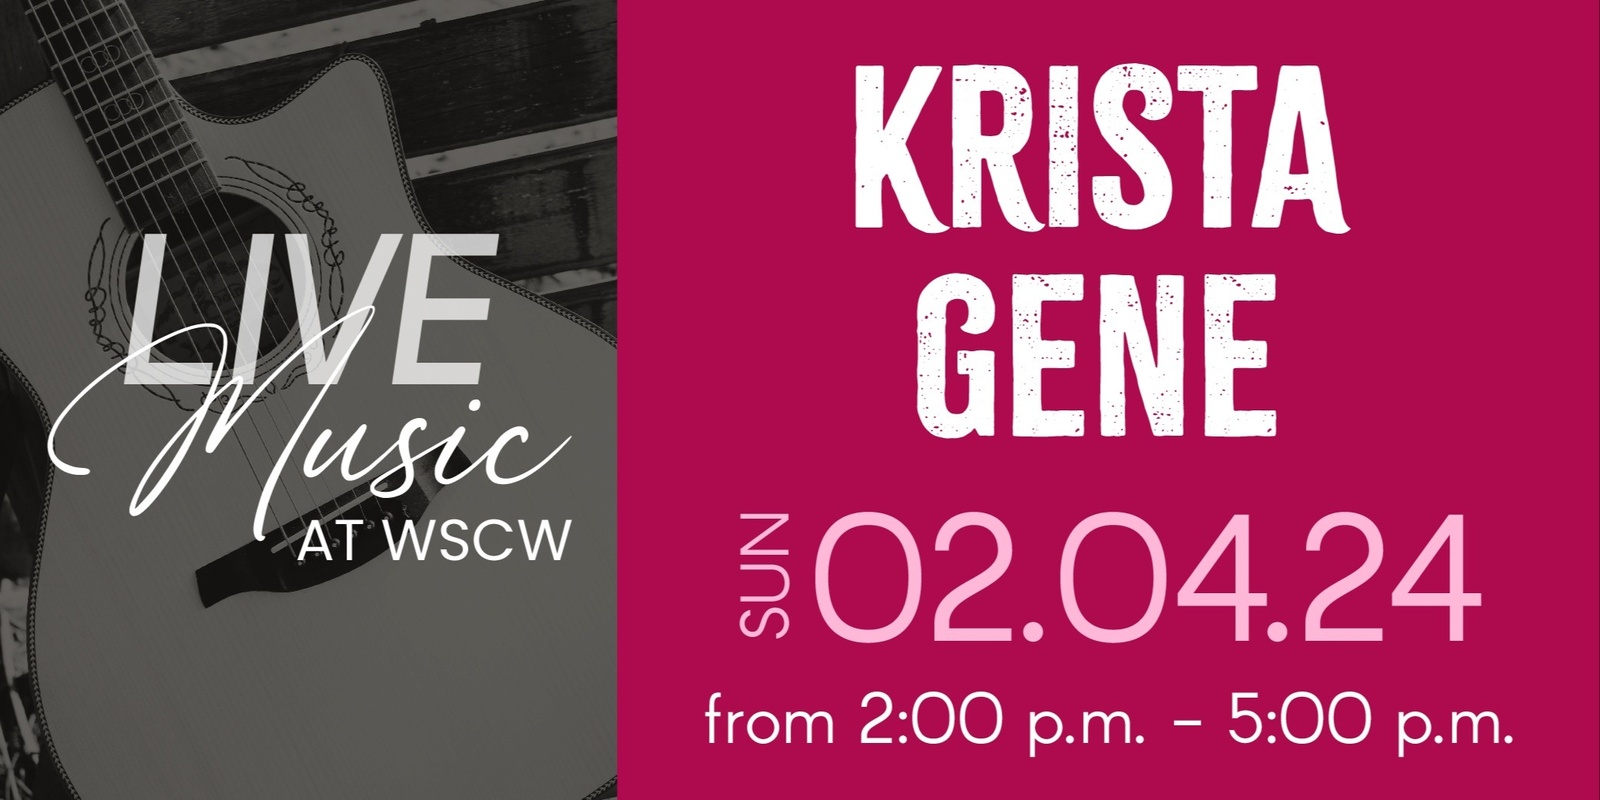 Banner image for Krista Gene Live at WSCW February 4